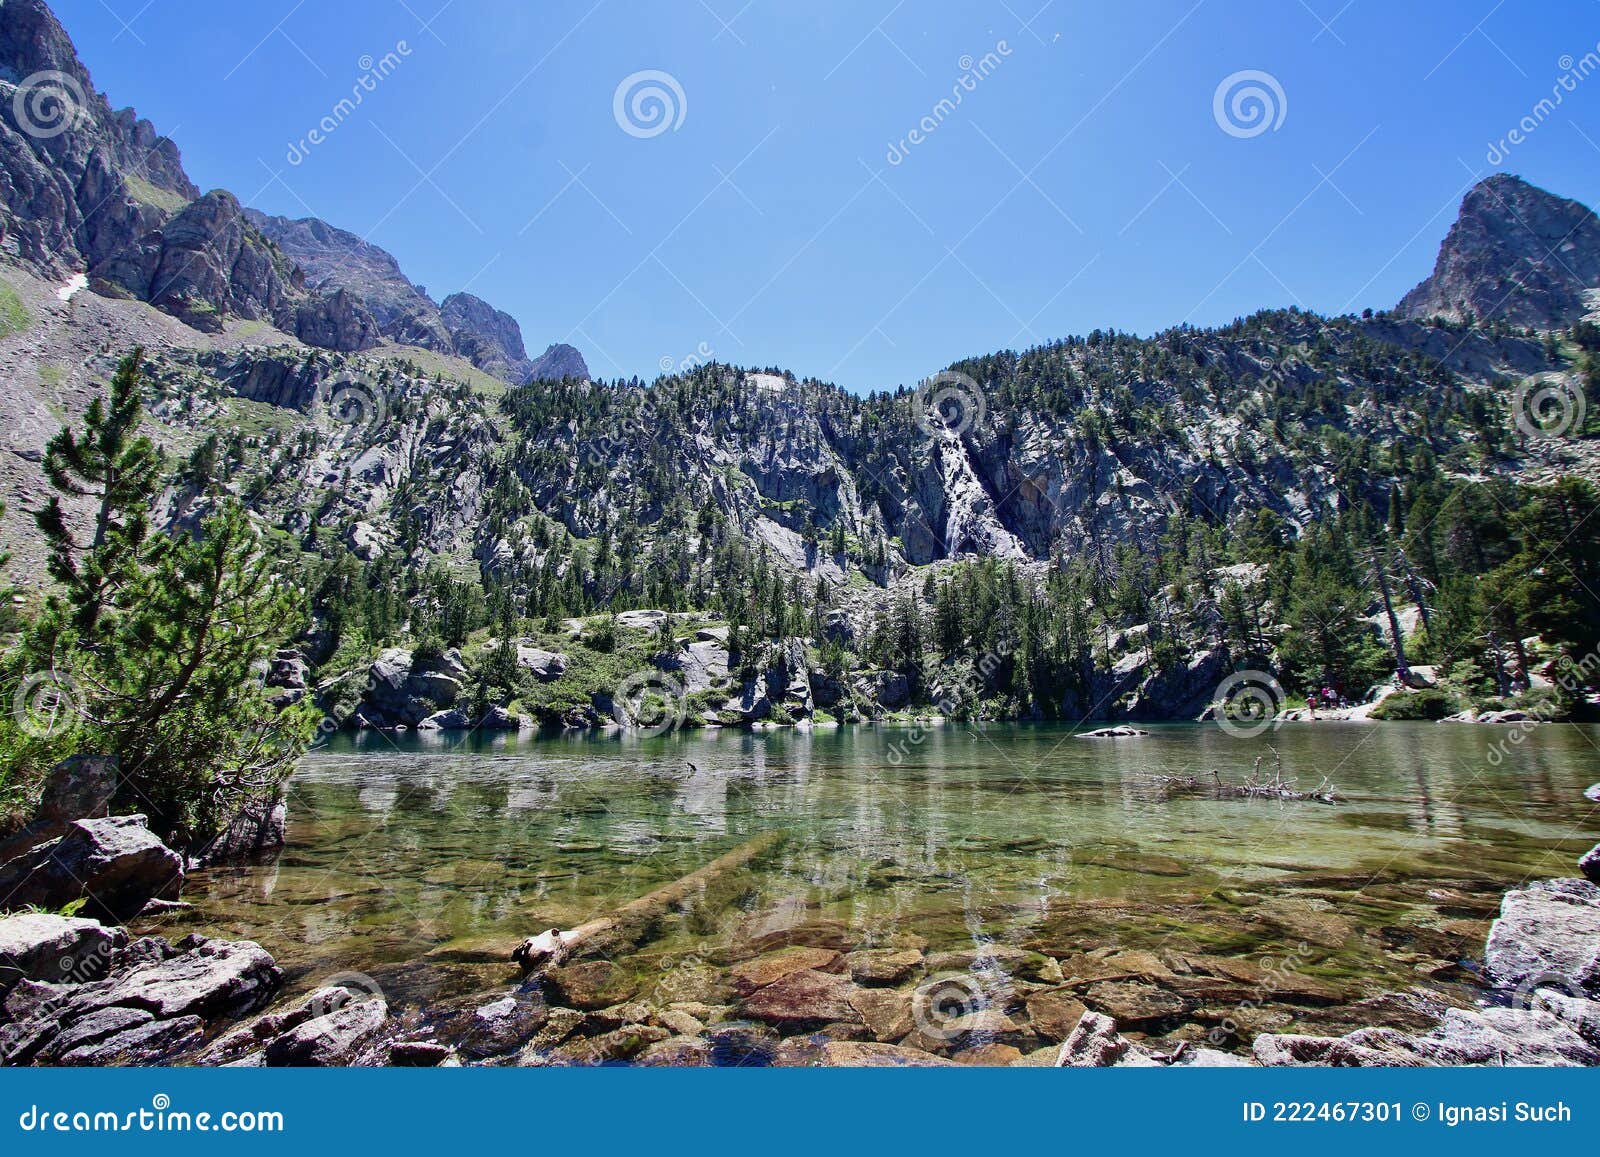 main view of escarpinosa lake, one of the most amazing spots of estÃÂ´ÃÂ³s valley in the pyrenees mountains, spain